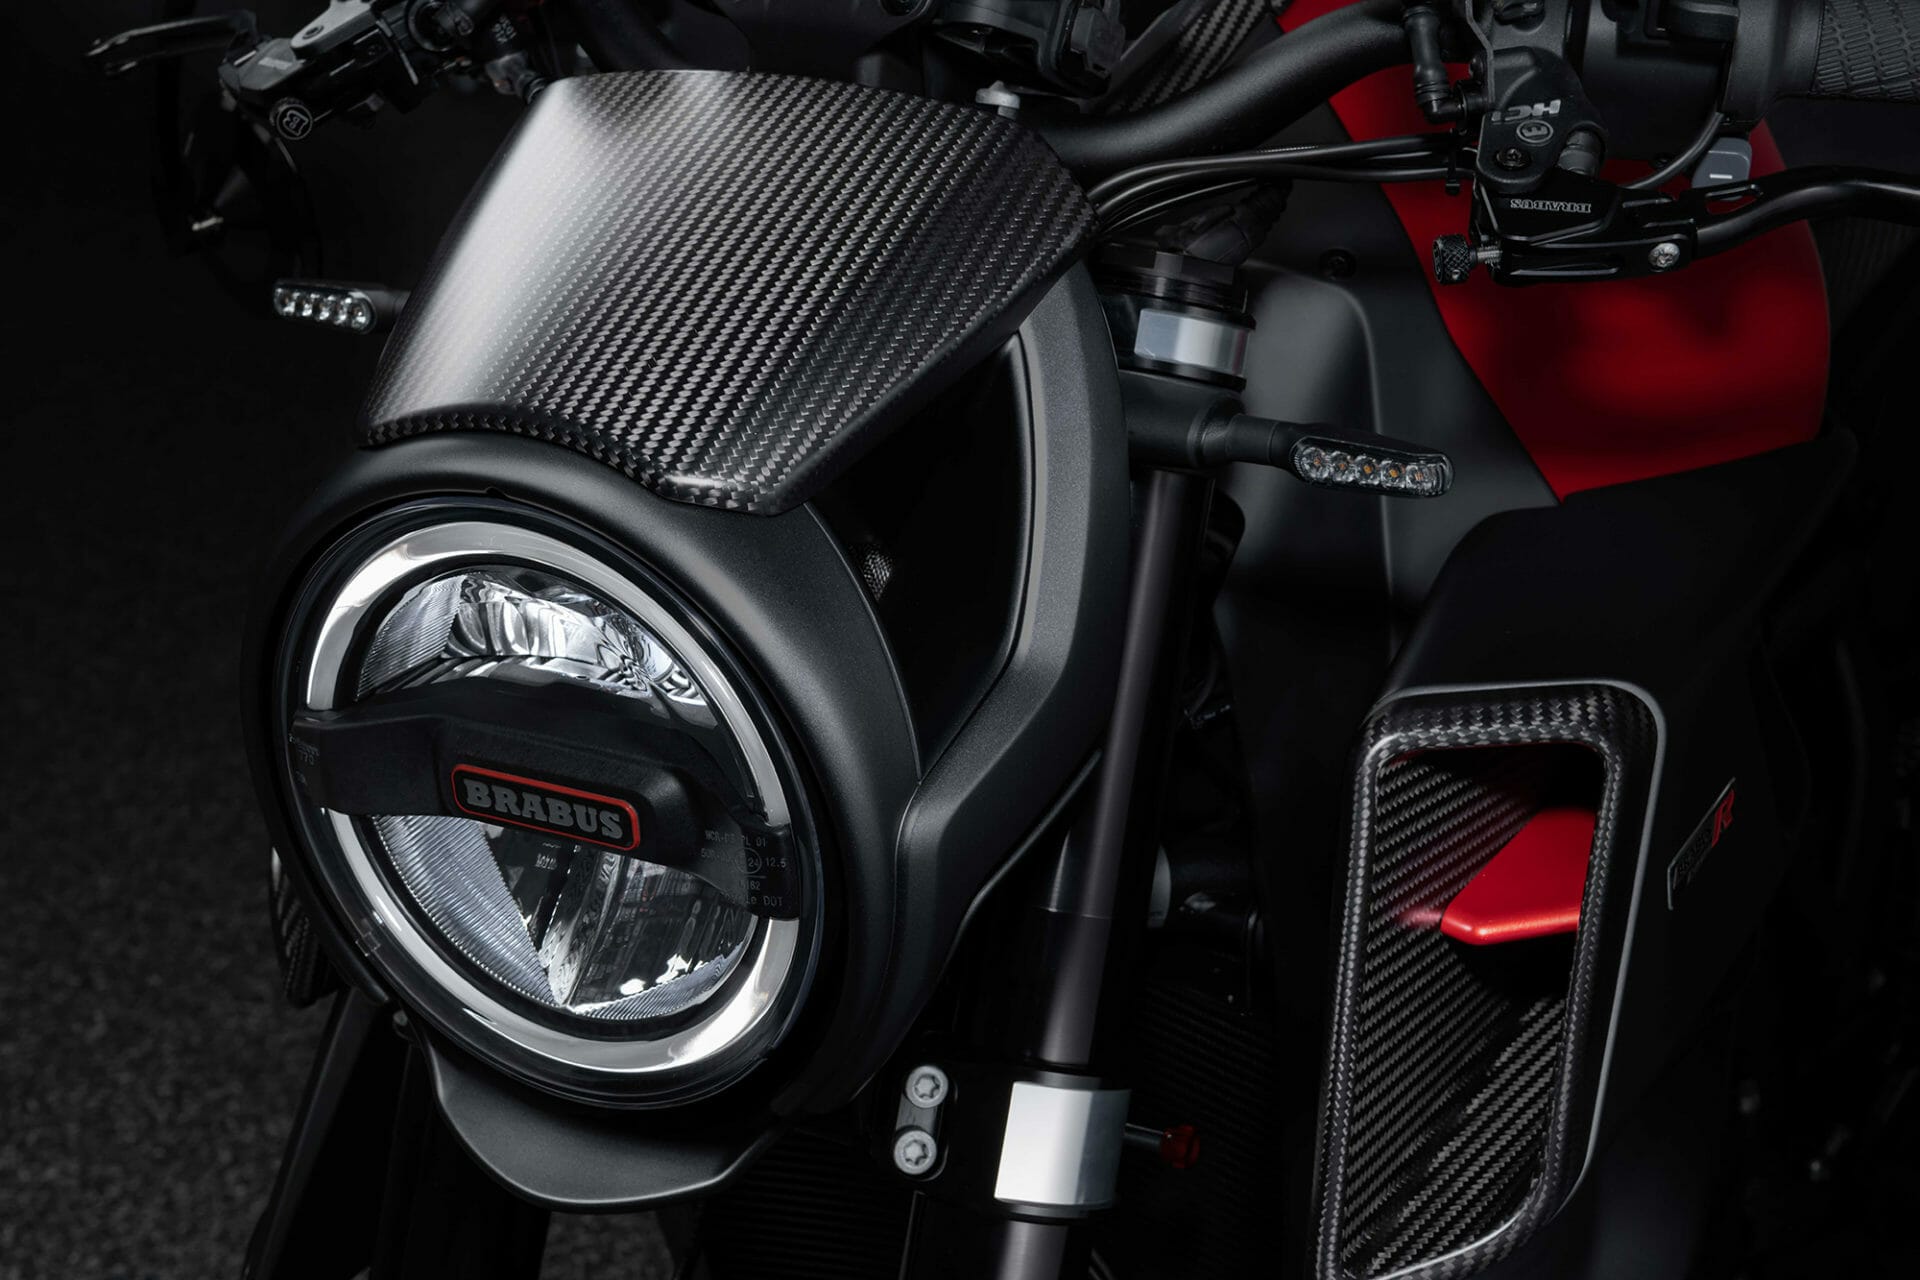 Brabus 1300 R Limited Edition - Upgraded KTM from the noble tuner
- also in the MOTORCYCLES.NEWS APP